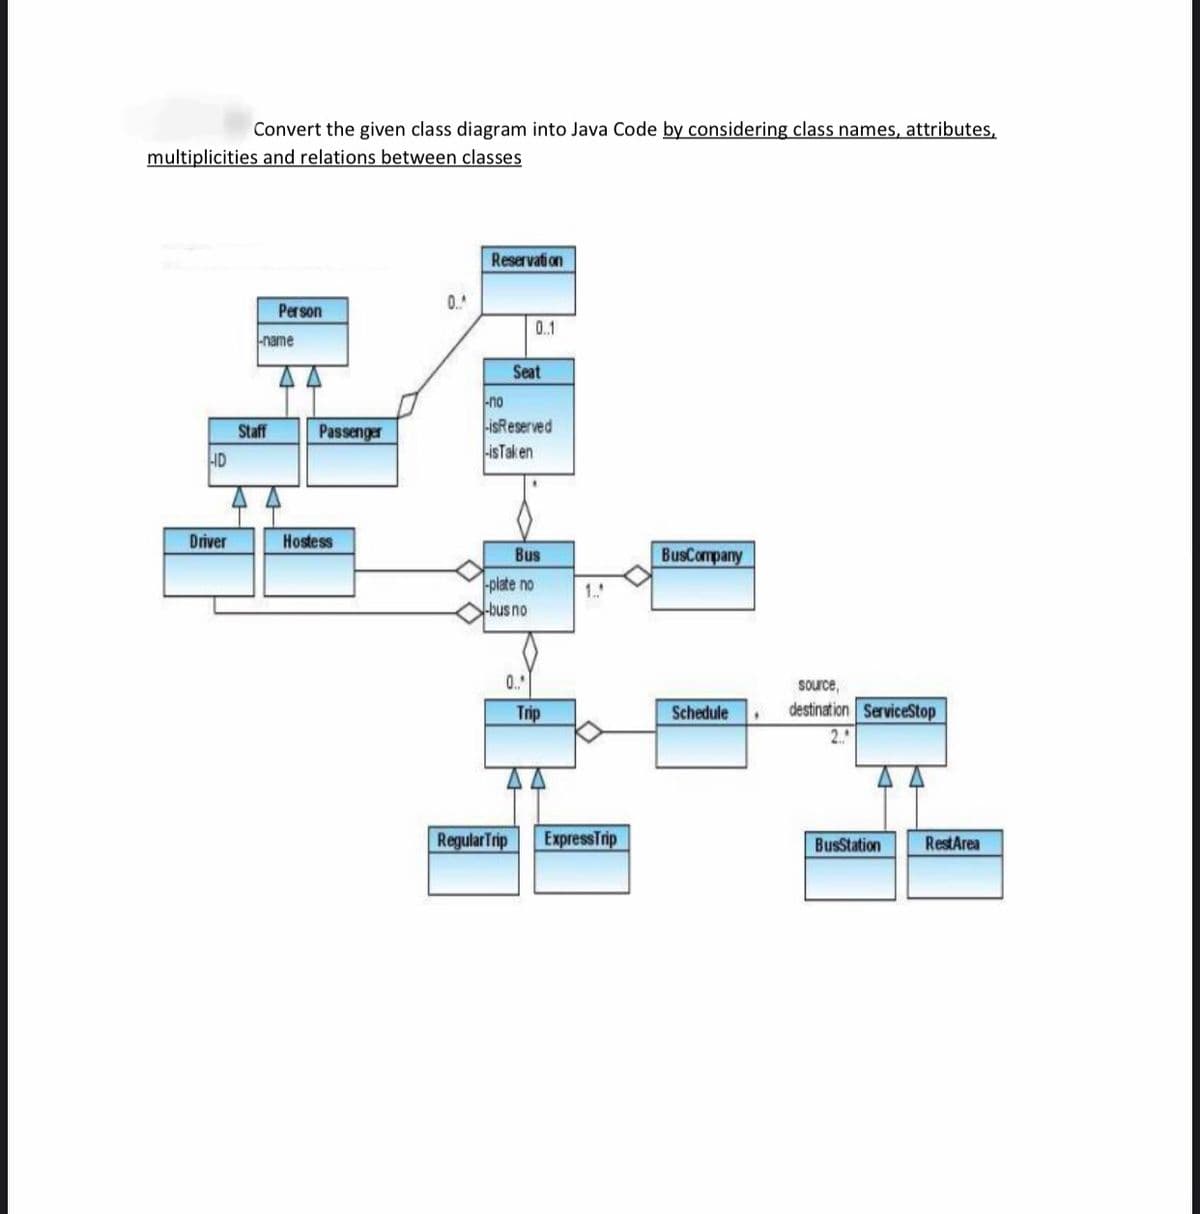 Convert the given class diagram into Java Code by considering class names, attributes,
multiplicities and relations between classes
Reservation
0.
Person
0.1
-name
Seat
-no
isReserved
-isTaken
Staff
Passenger
HD
Driver
Hostess
Bus
BusCompany
-plate no
1.
ou snq-K
0.
source,
Trip
Schedule
destination ServiceStop
2.
RegularTrip
ExpressTrip
BusStation
RestArea
